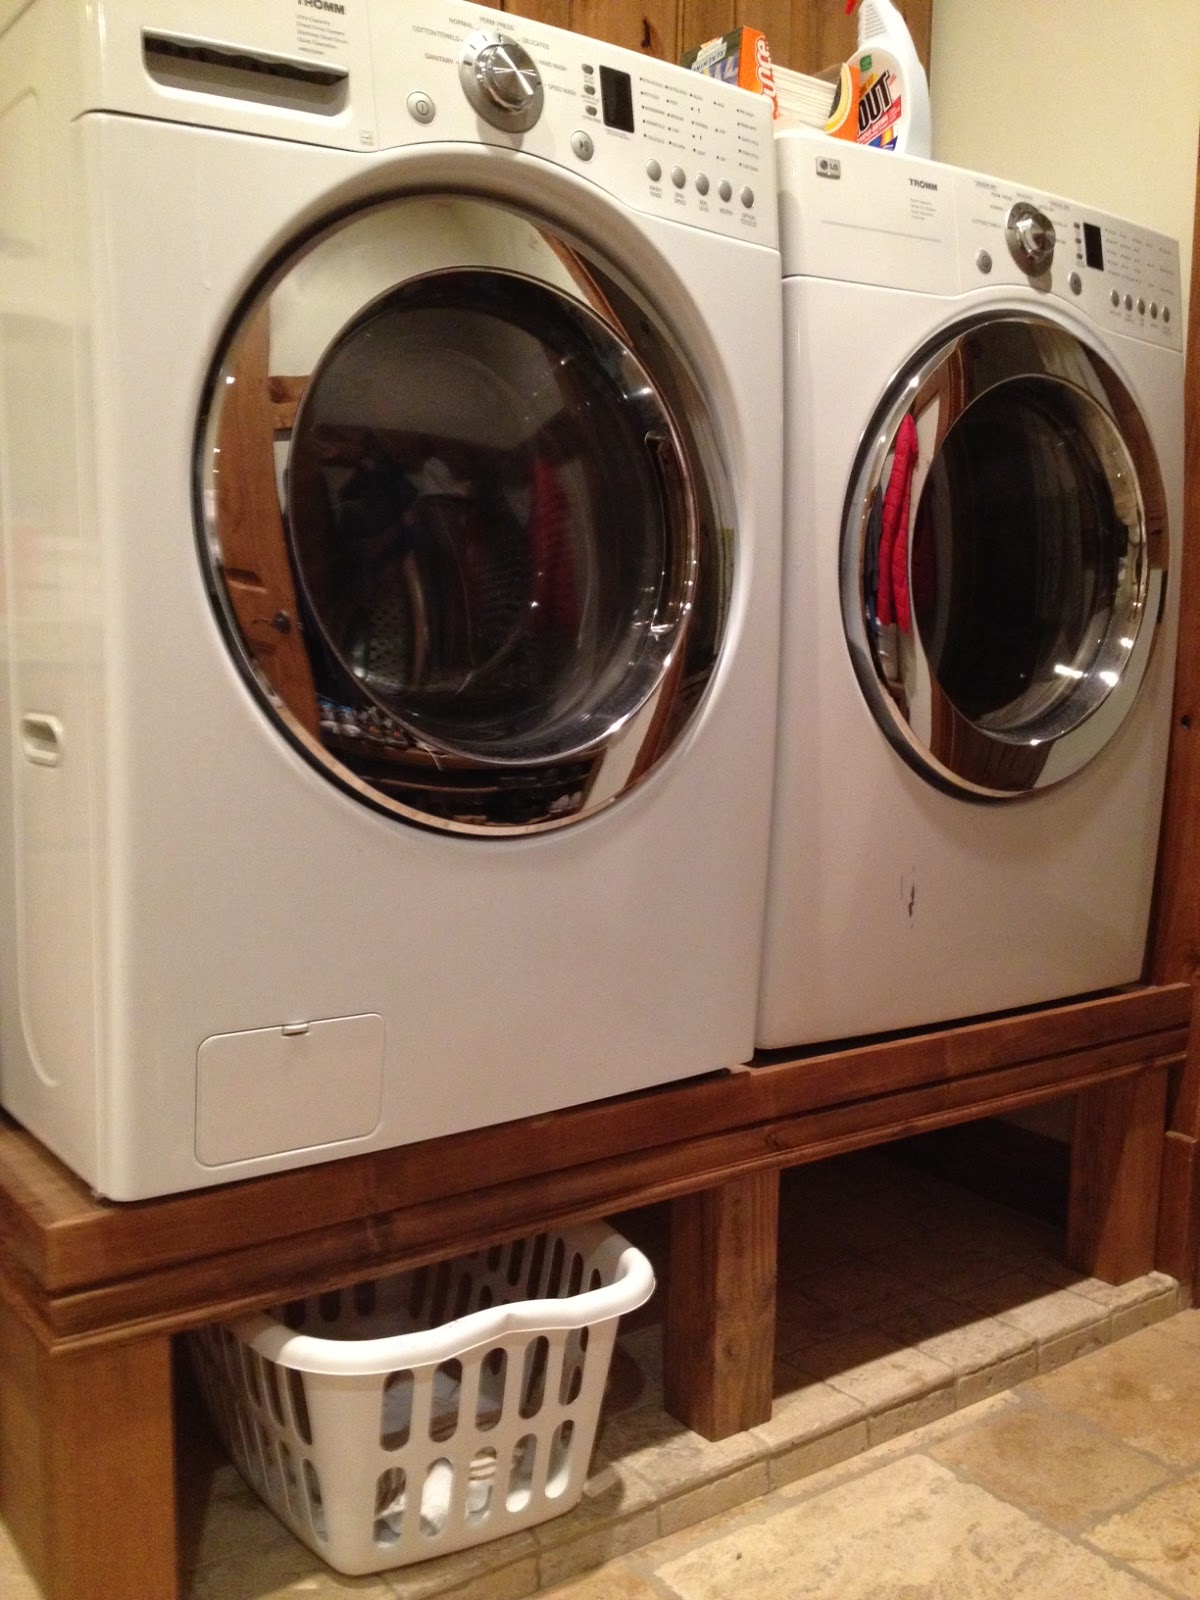 Dad Built This: Washing and Dryer Stand